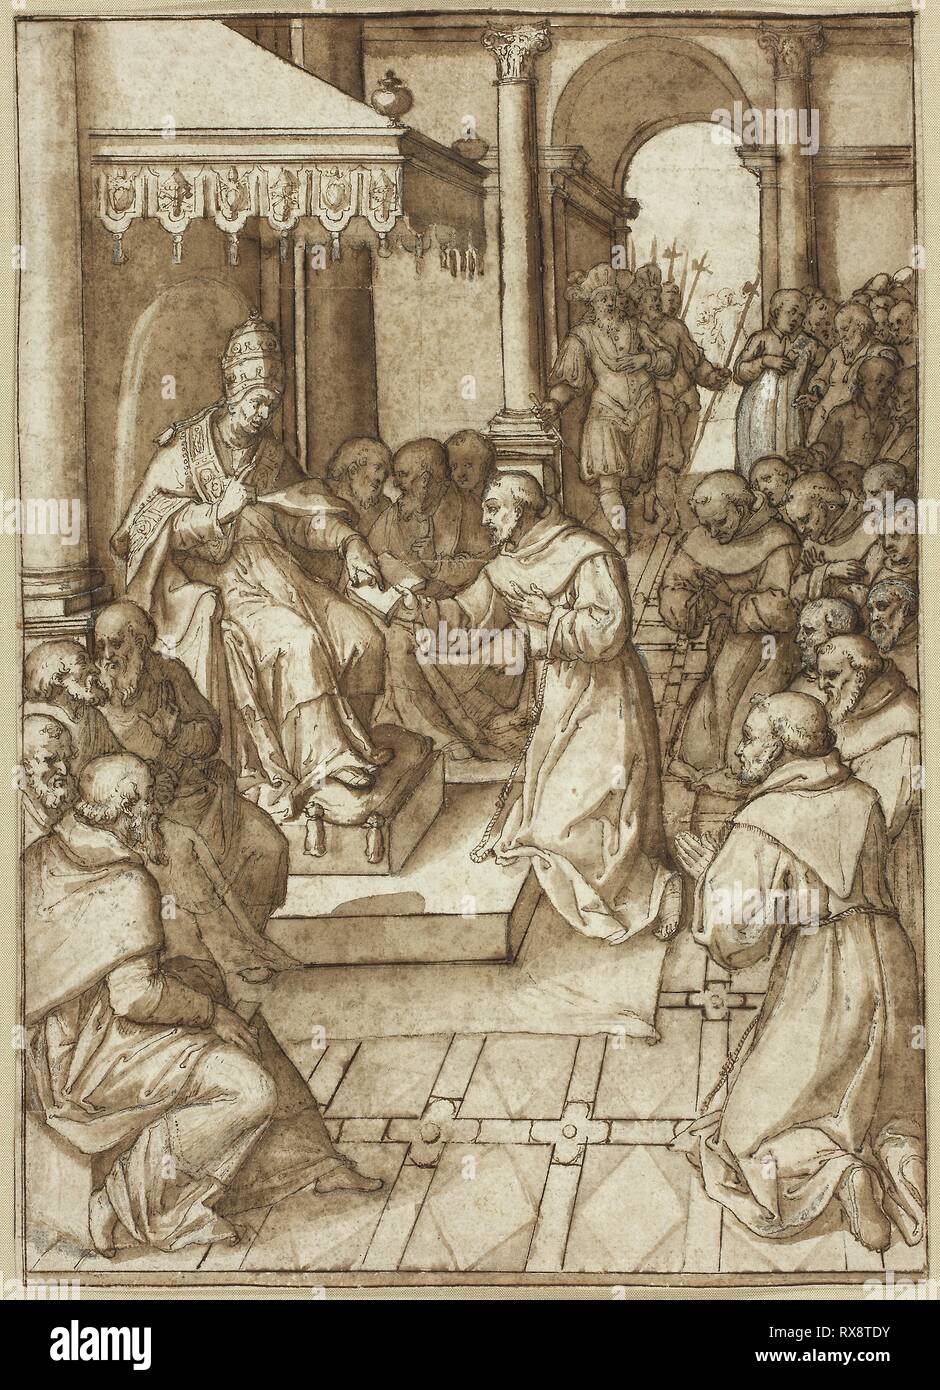 Approval of the Rules of the Franciscan Order by Pope Innocent III in 1209. Livio Agresti; Italian, 1508-1579. Date: 1528-1579. Dimensions: 288 x 203 mm (sight). Pen and brown ink, with brush and brown wash, heightened with lead white gouache, over incising and black chalk, on cream laid paper. Origin: Italy. Museum: The Chicago Art Institute. Stock Photo